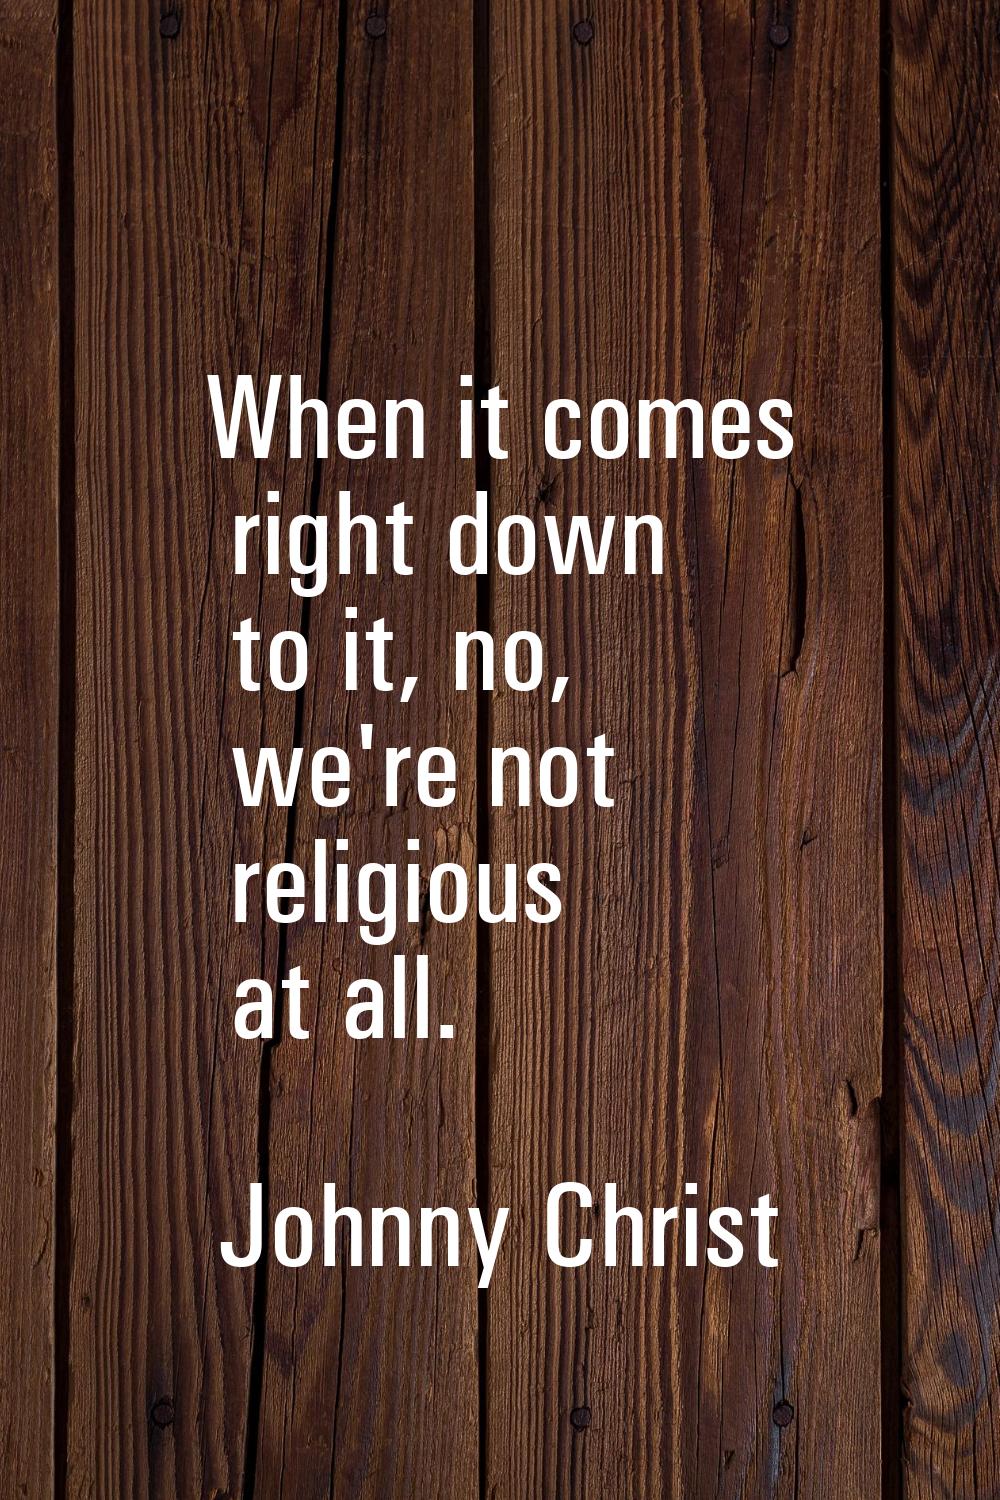 When it comes right down to it, no, we're not religious at all.